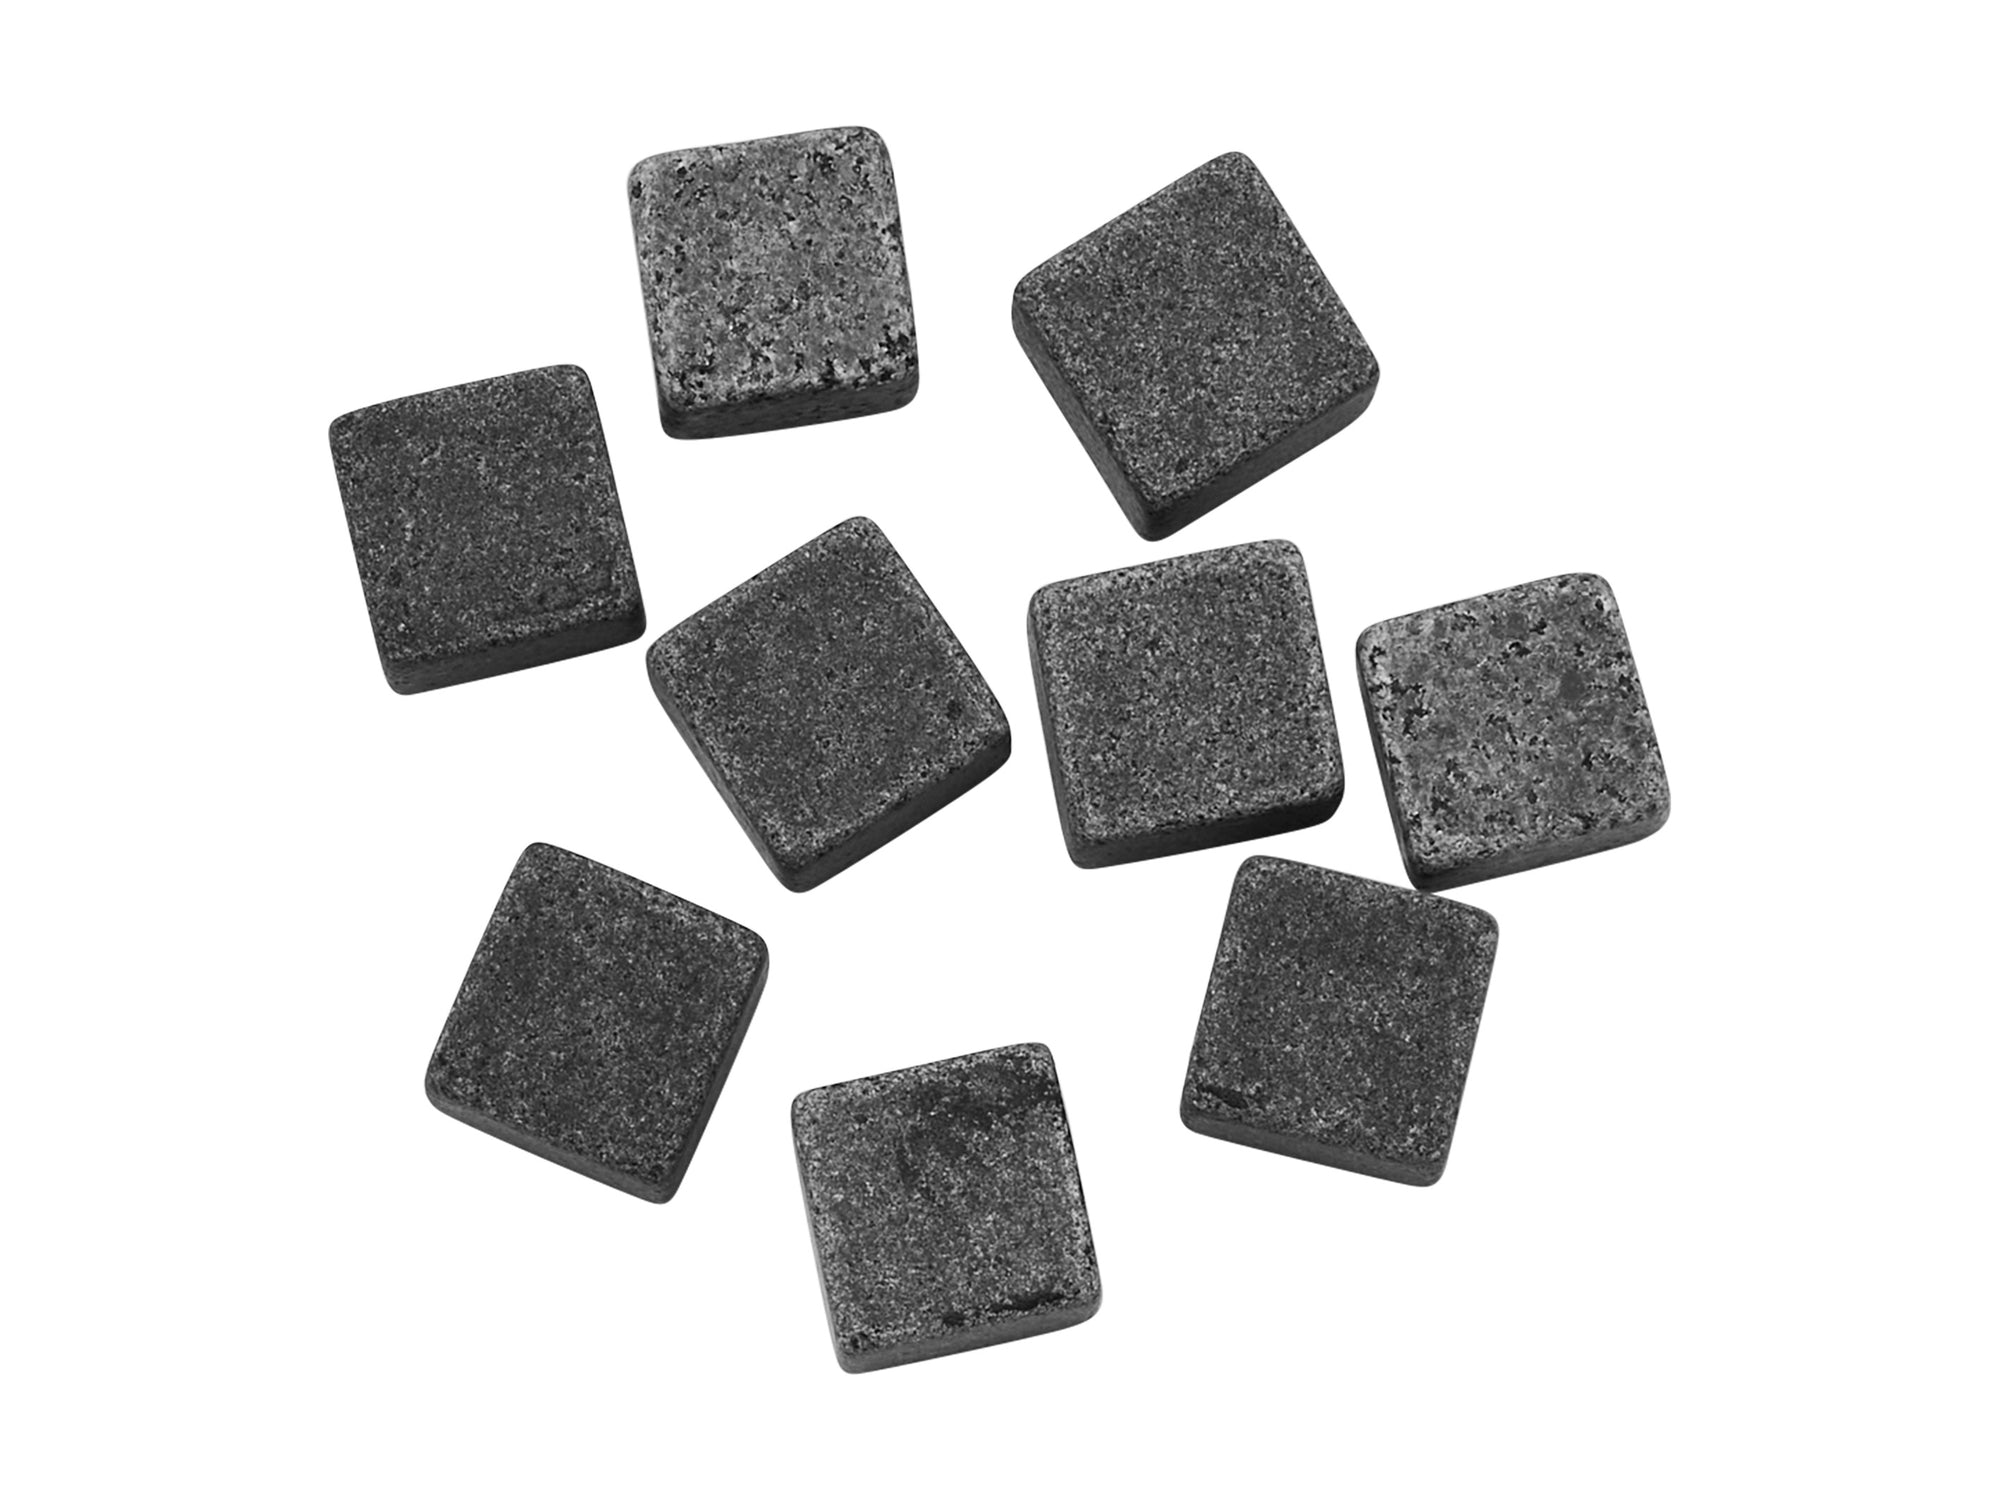 Cocktail & Co Reusable Whisky Stone Set of 9 Charcoal